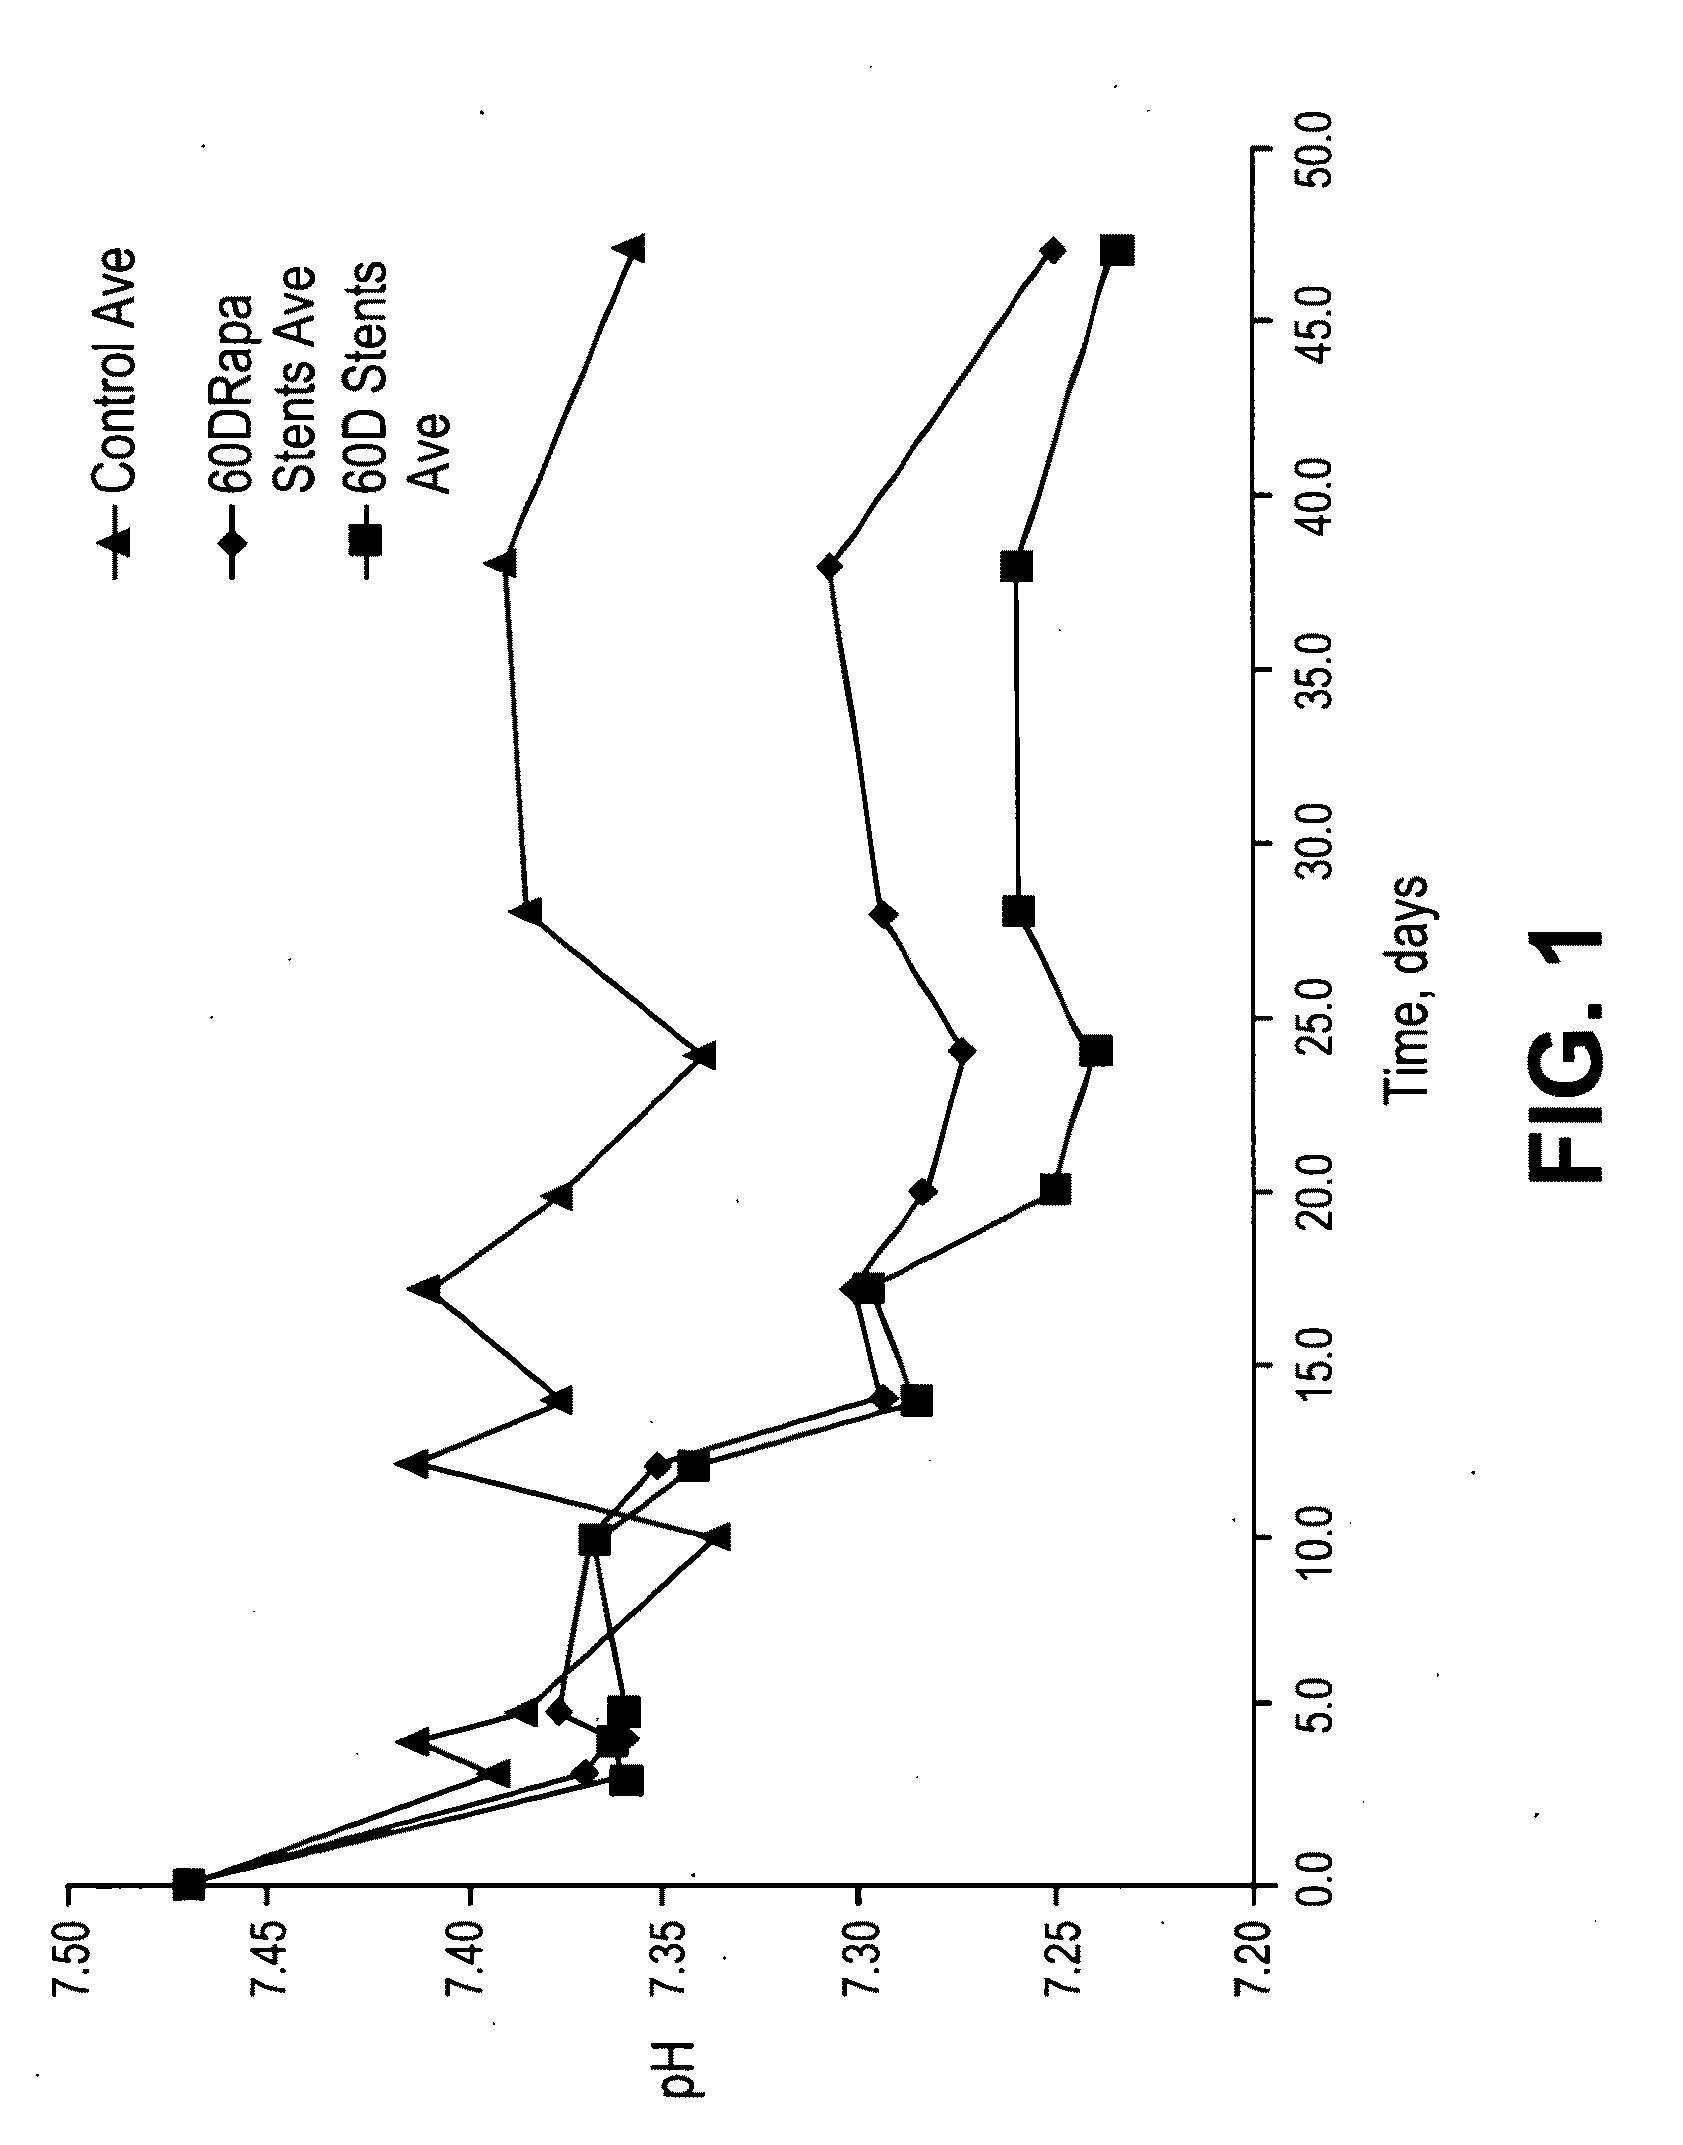 Stents having bioabsorbable layers